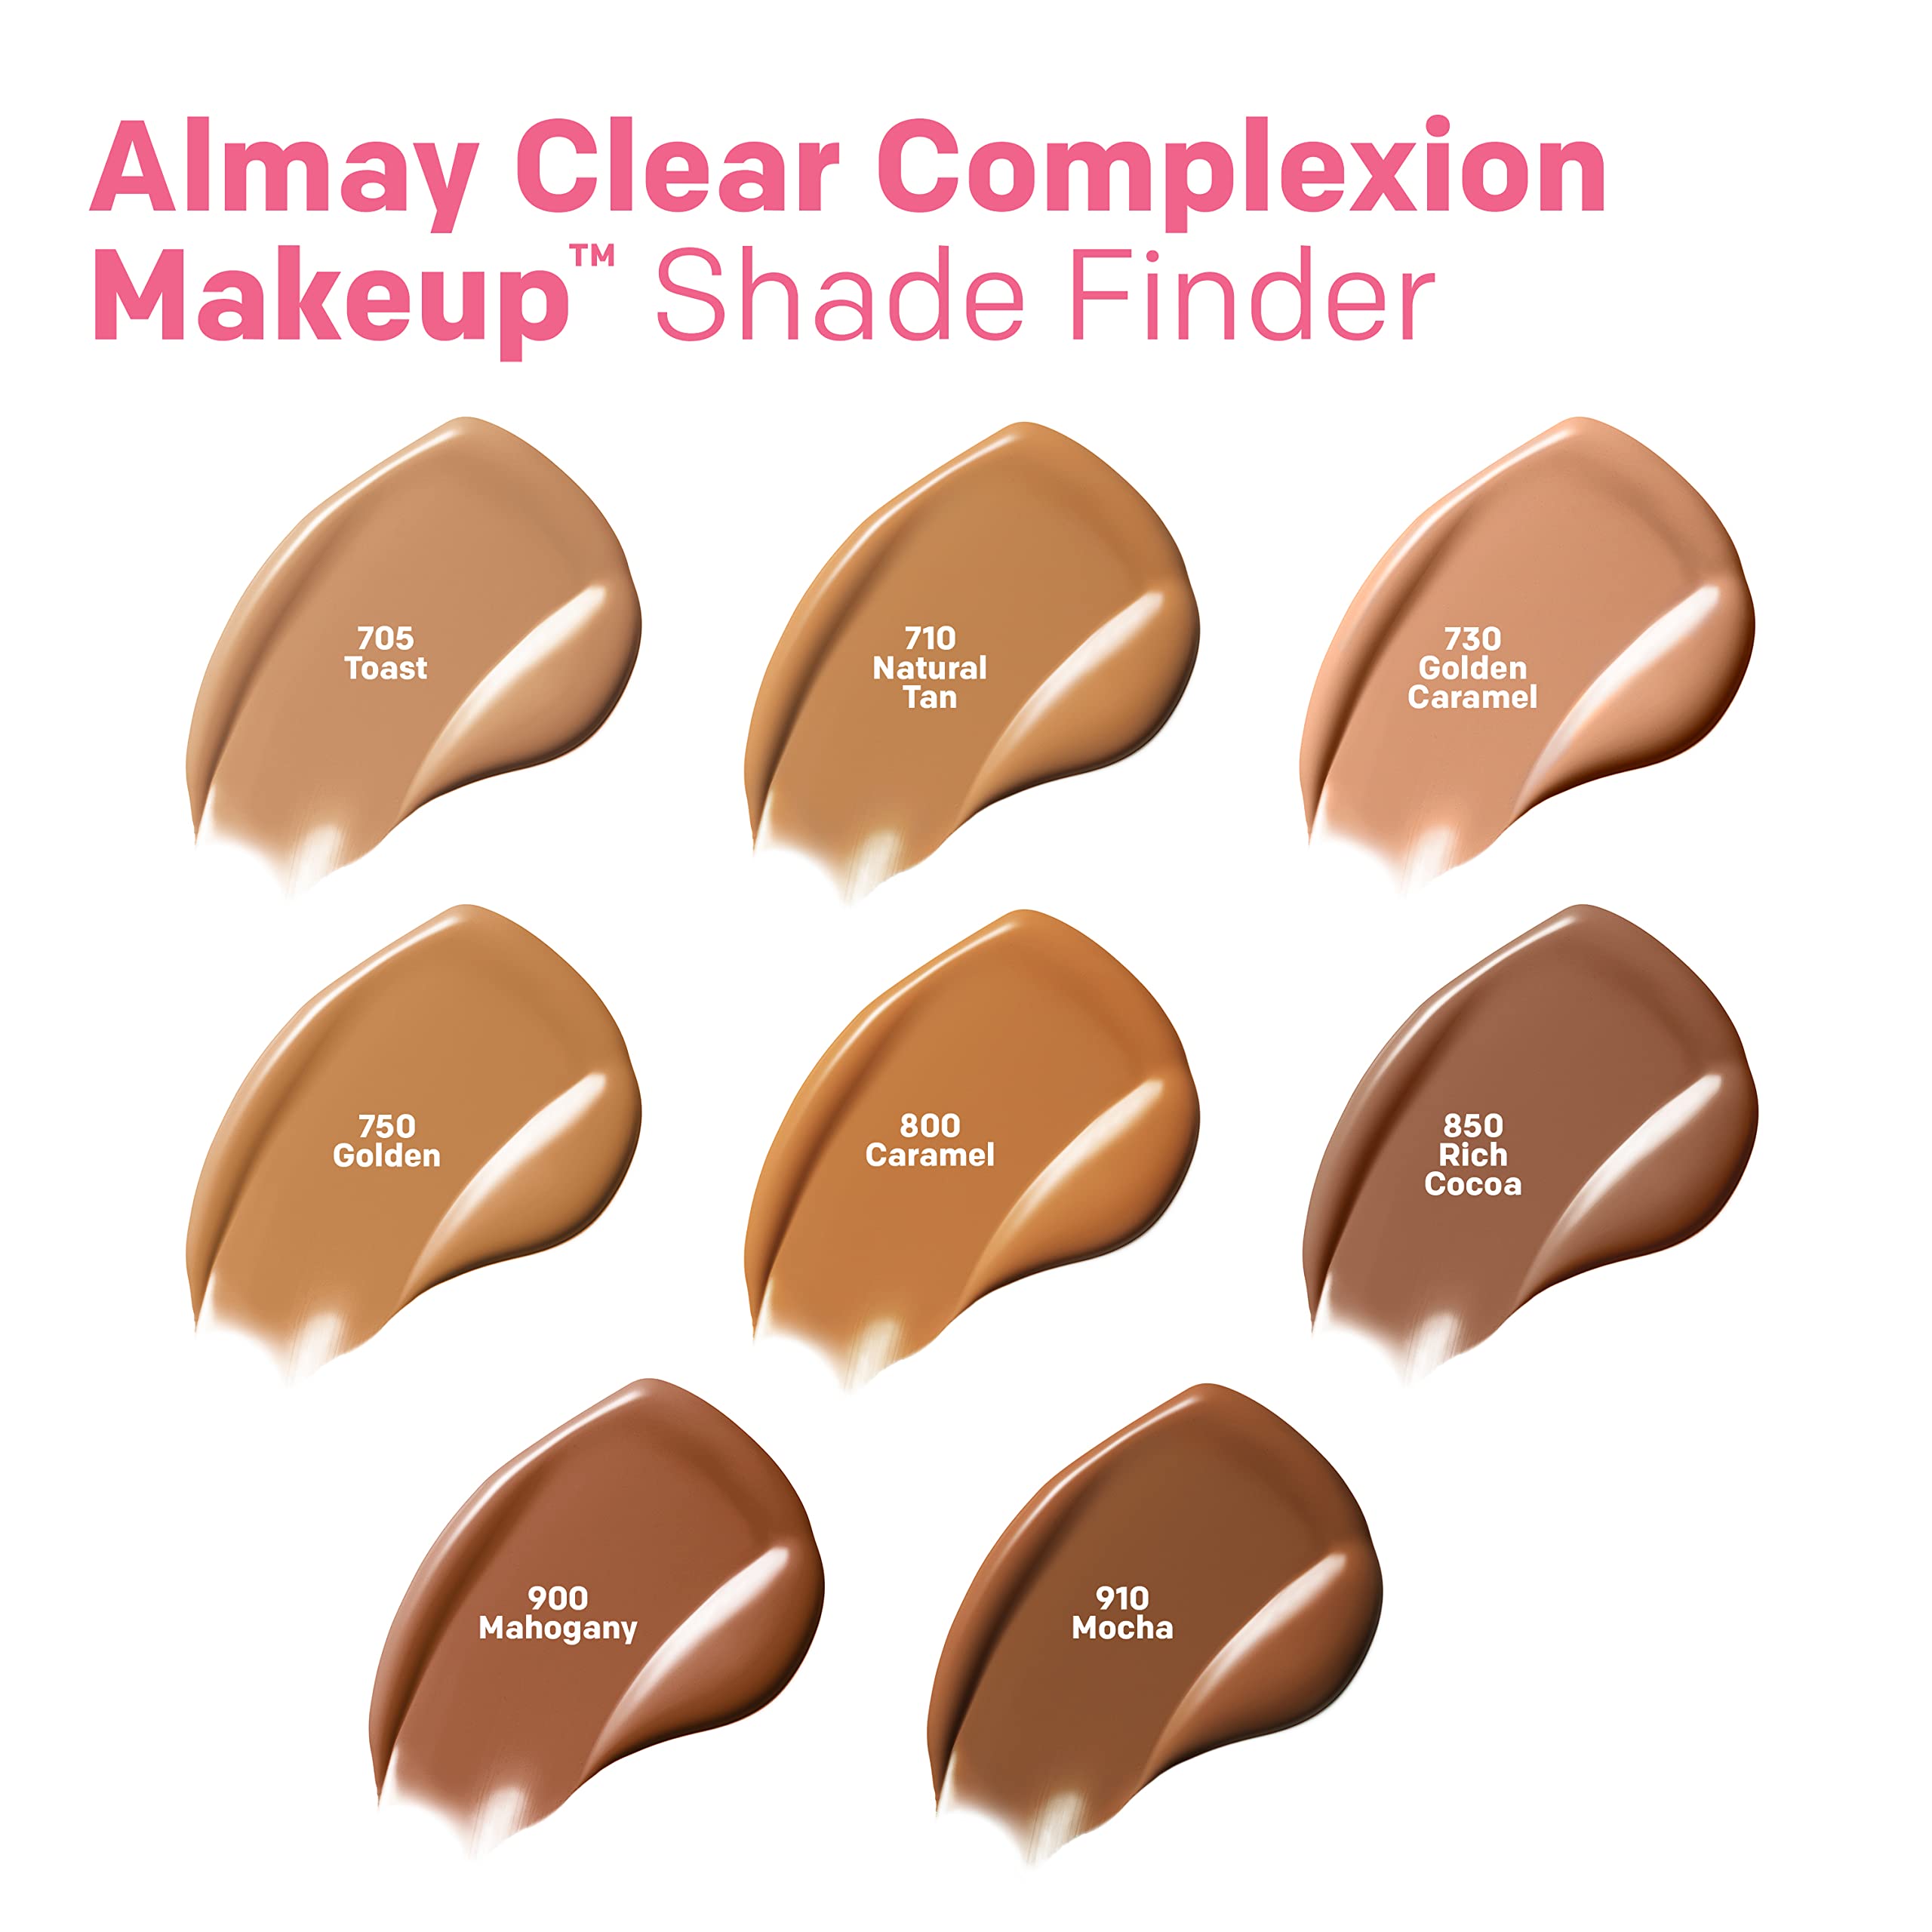 Almay Clear Complexion Acne Foundation Makeup with Salicylic Acid - Lightweight, Medium Coverage, Hypoallergenic-Fragrance Free, for Sensitive Skin , 100 Ivory, 1 fl oz.